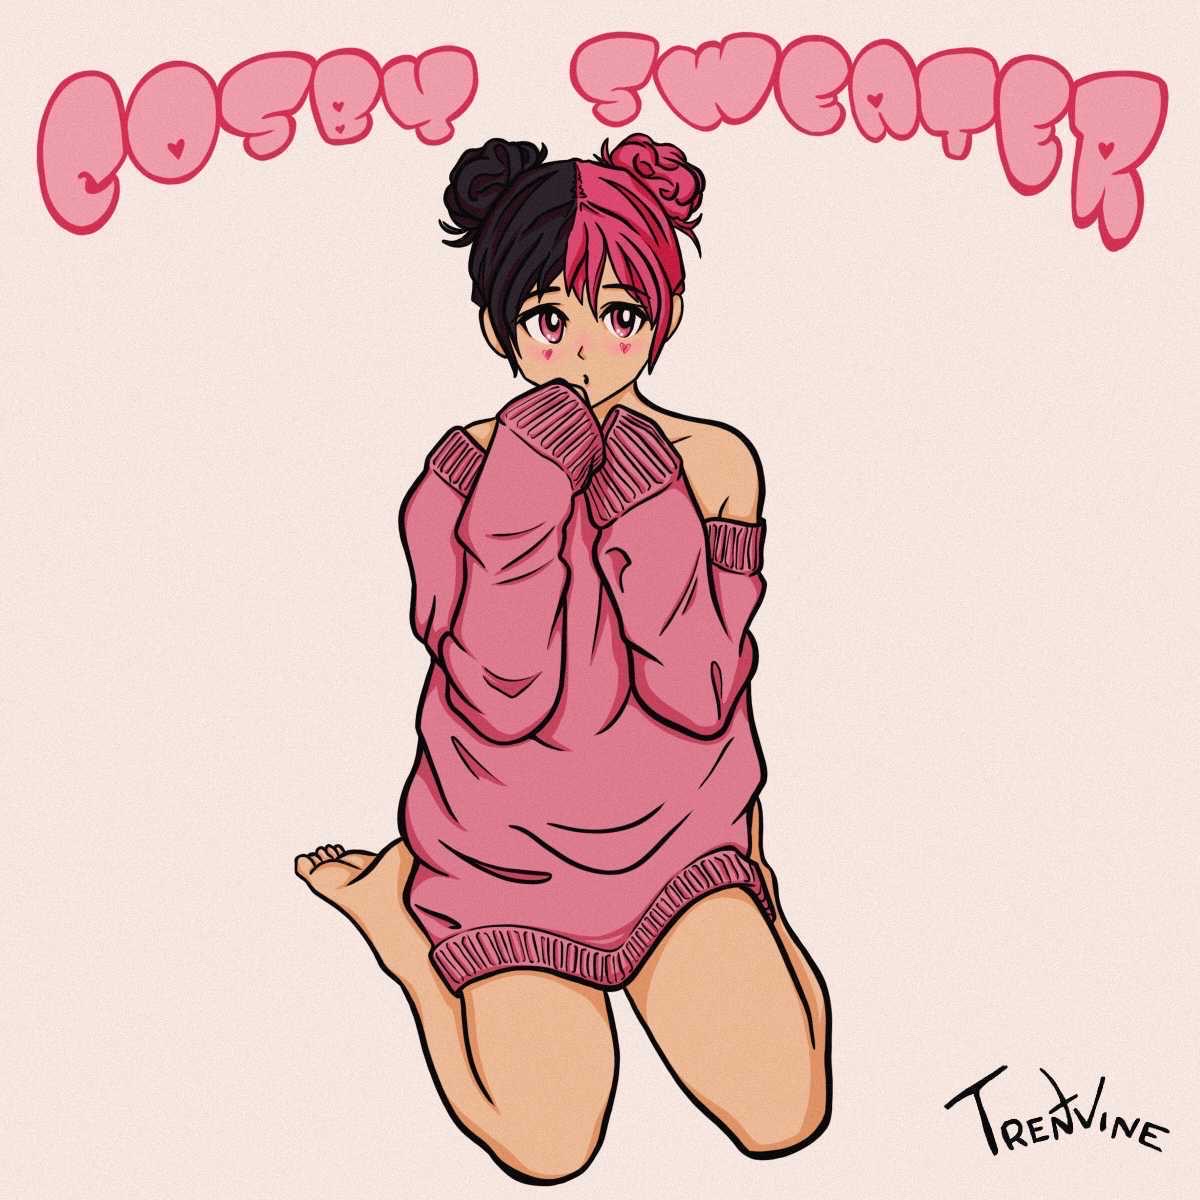 Album art of an anime girl with black & pink hair, wearing just a loose fitting pink sweater